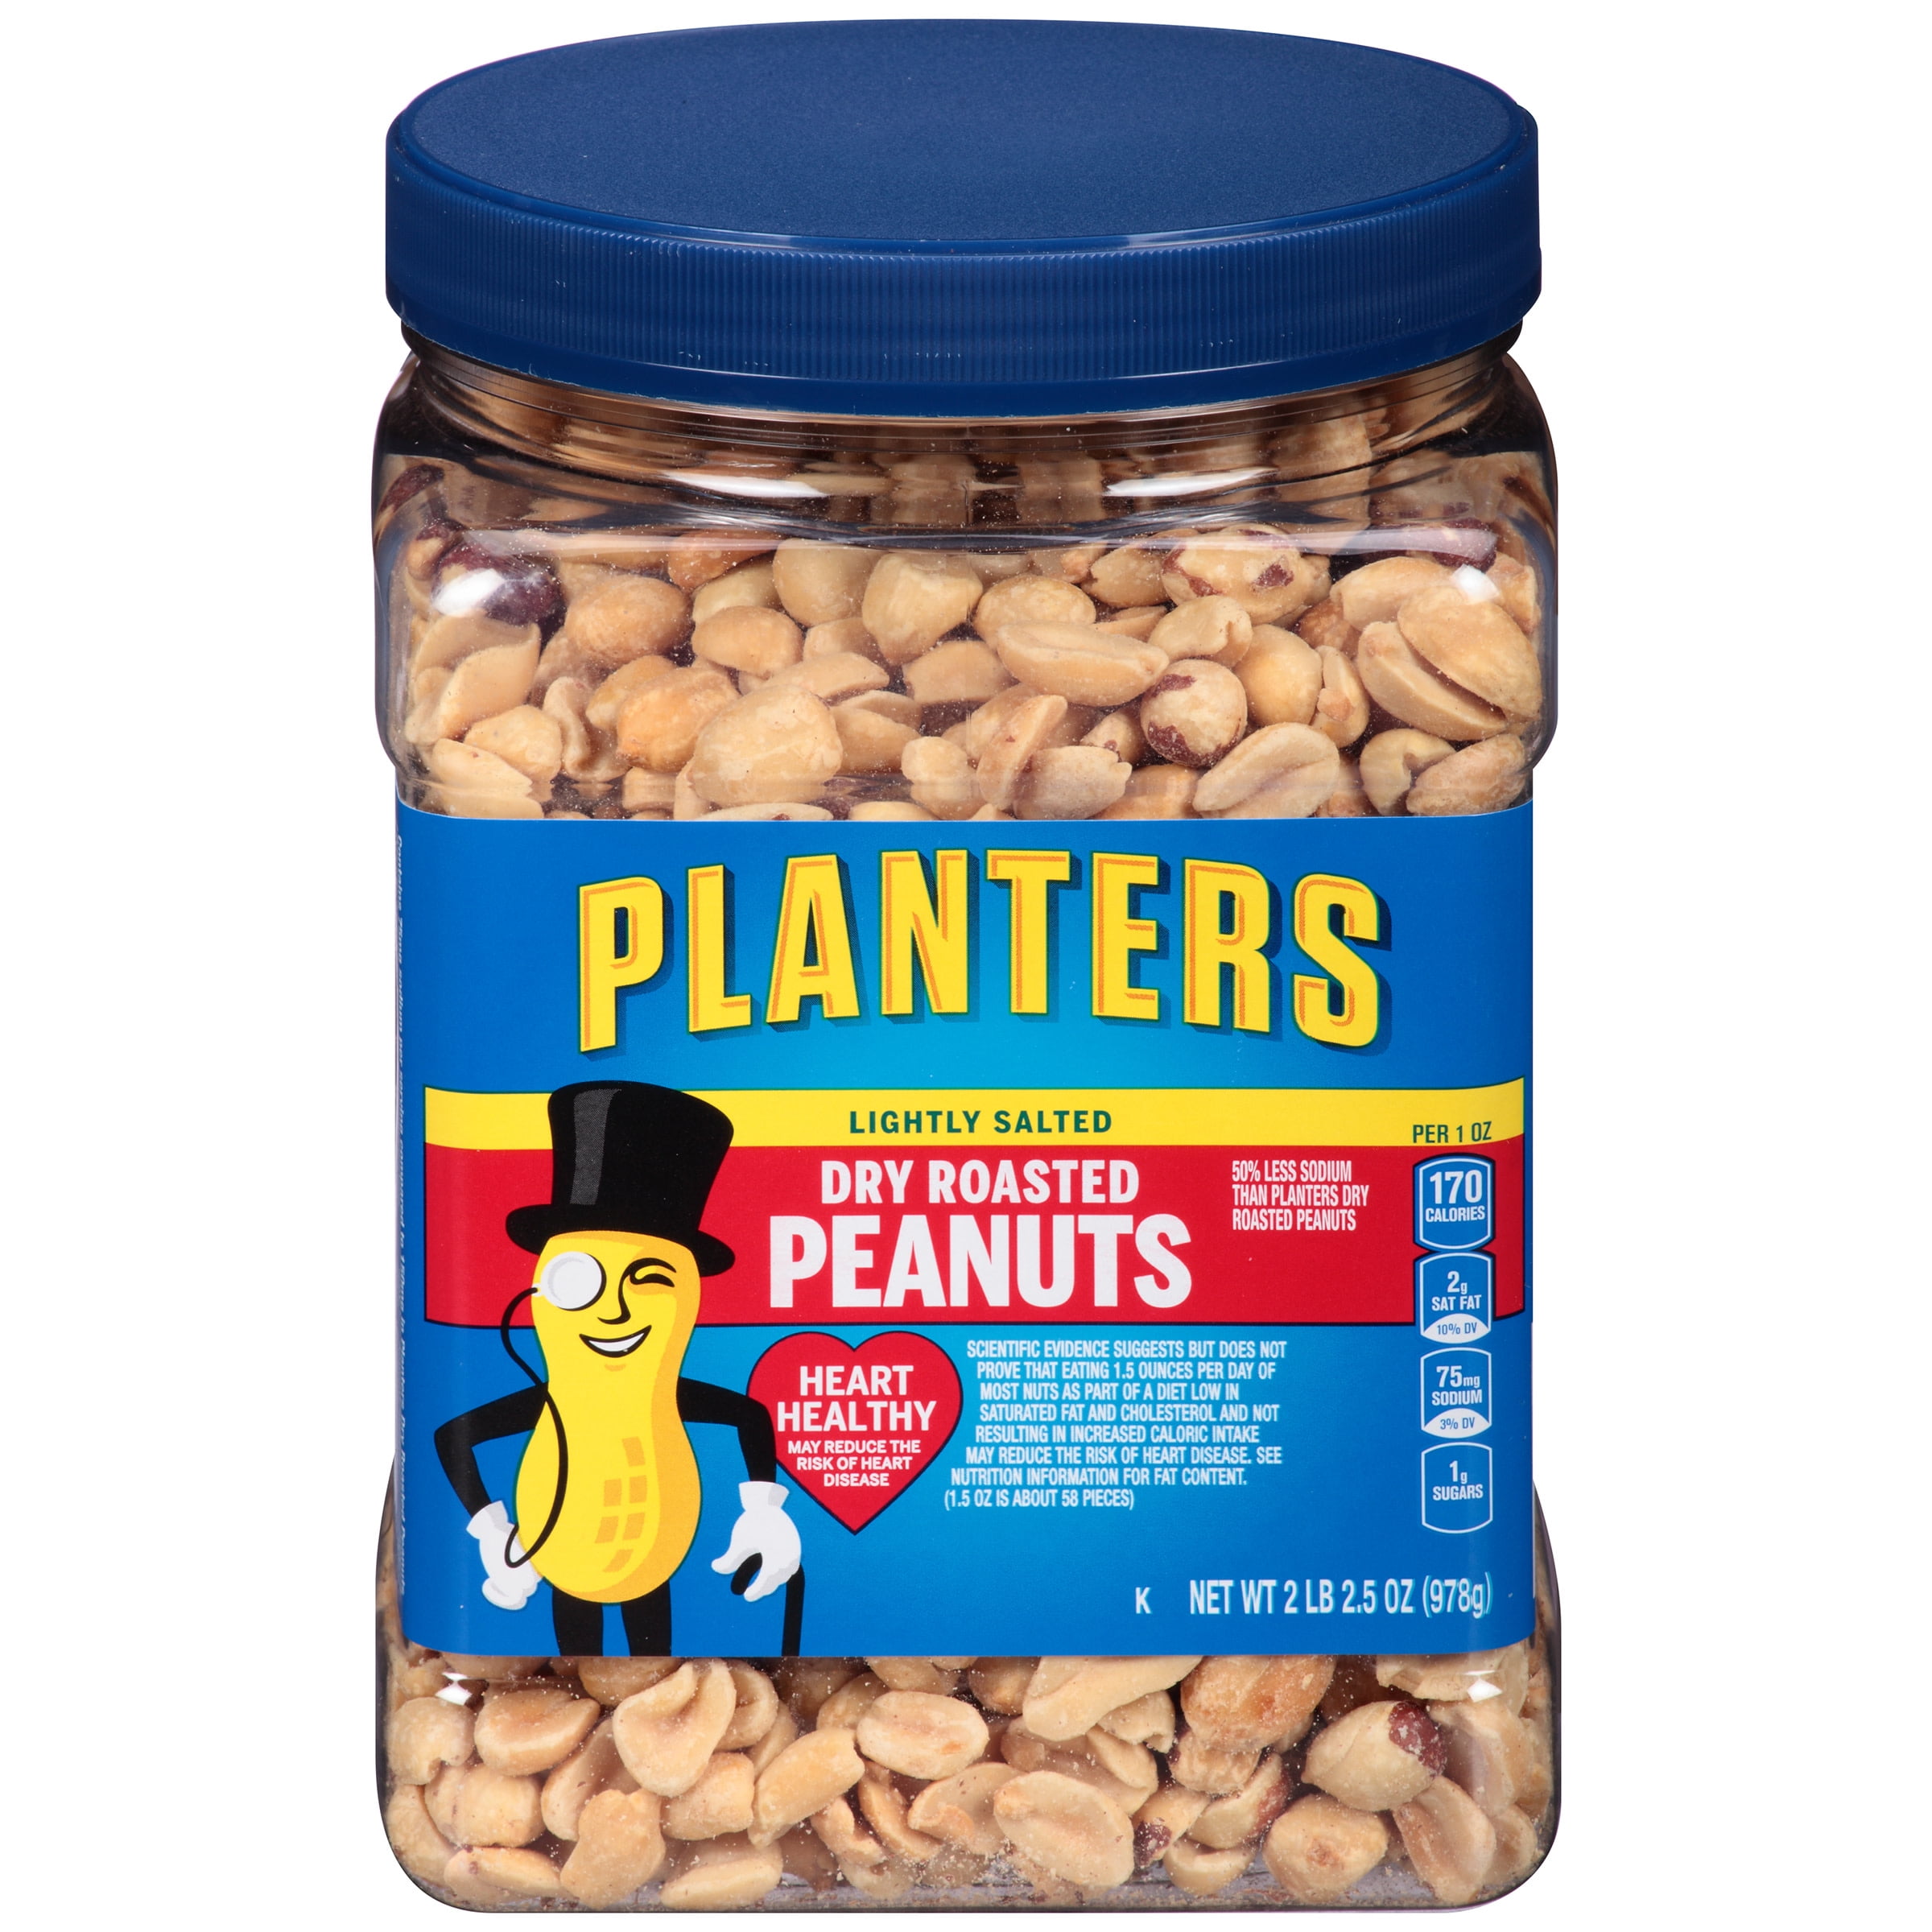 Planters Lightly Salted Dry Roasted Peanuts, 2.16 lb Container